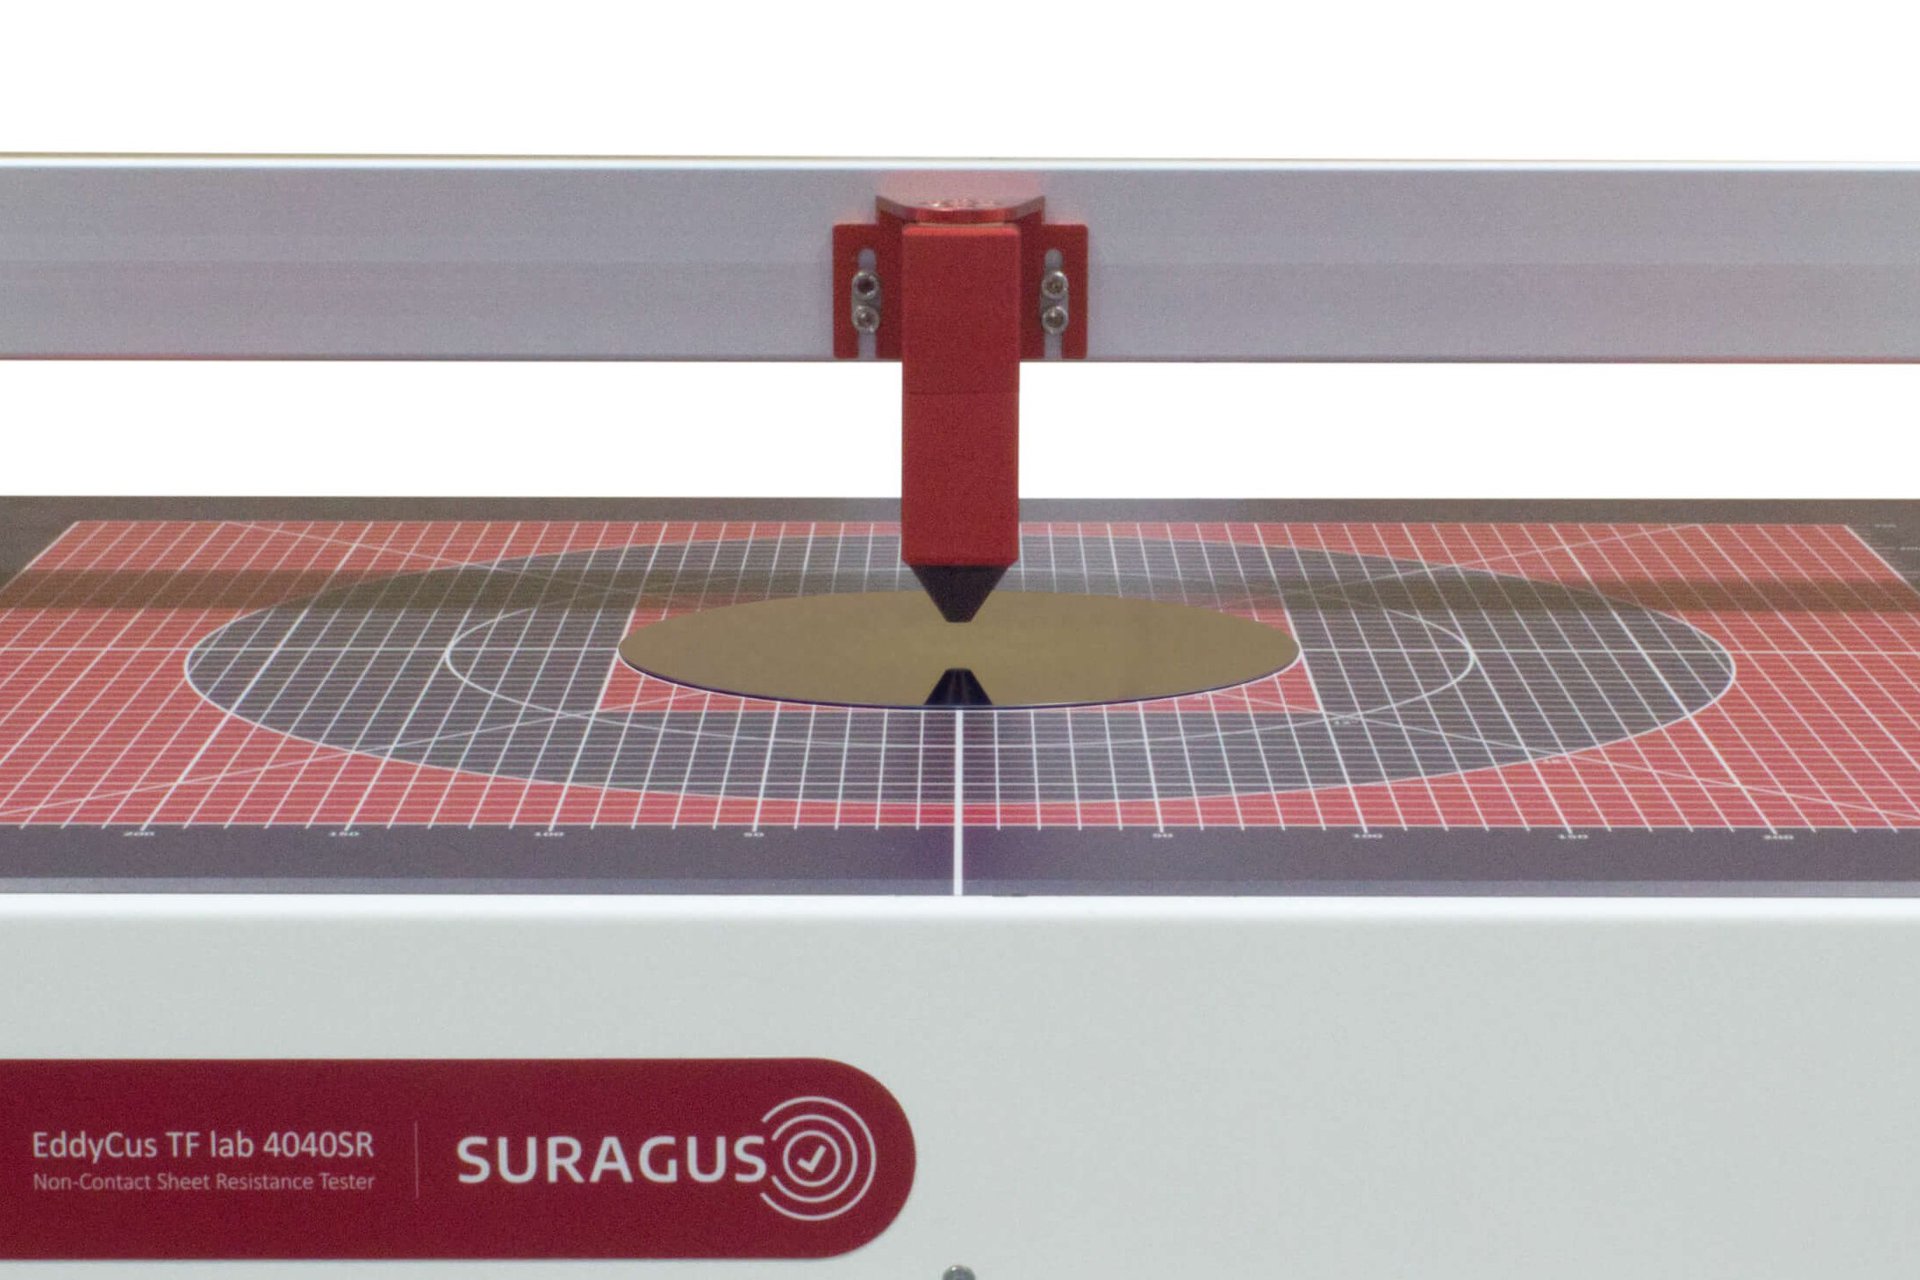 Sheet resistance measurement device EddyCus® TF lab 2020SR with a glass